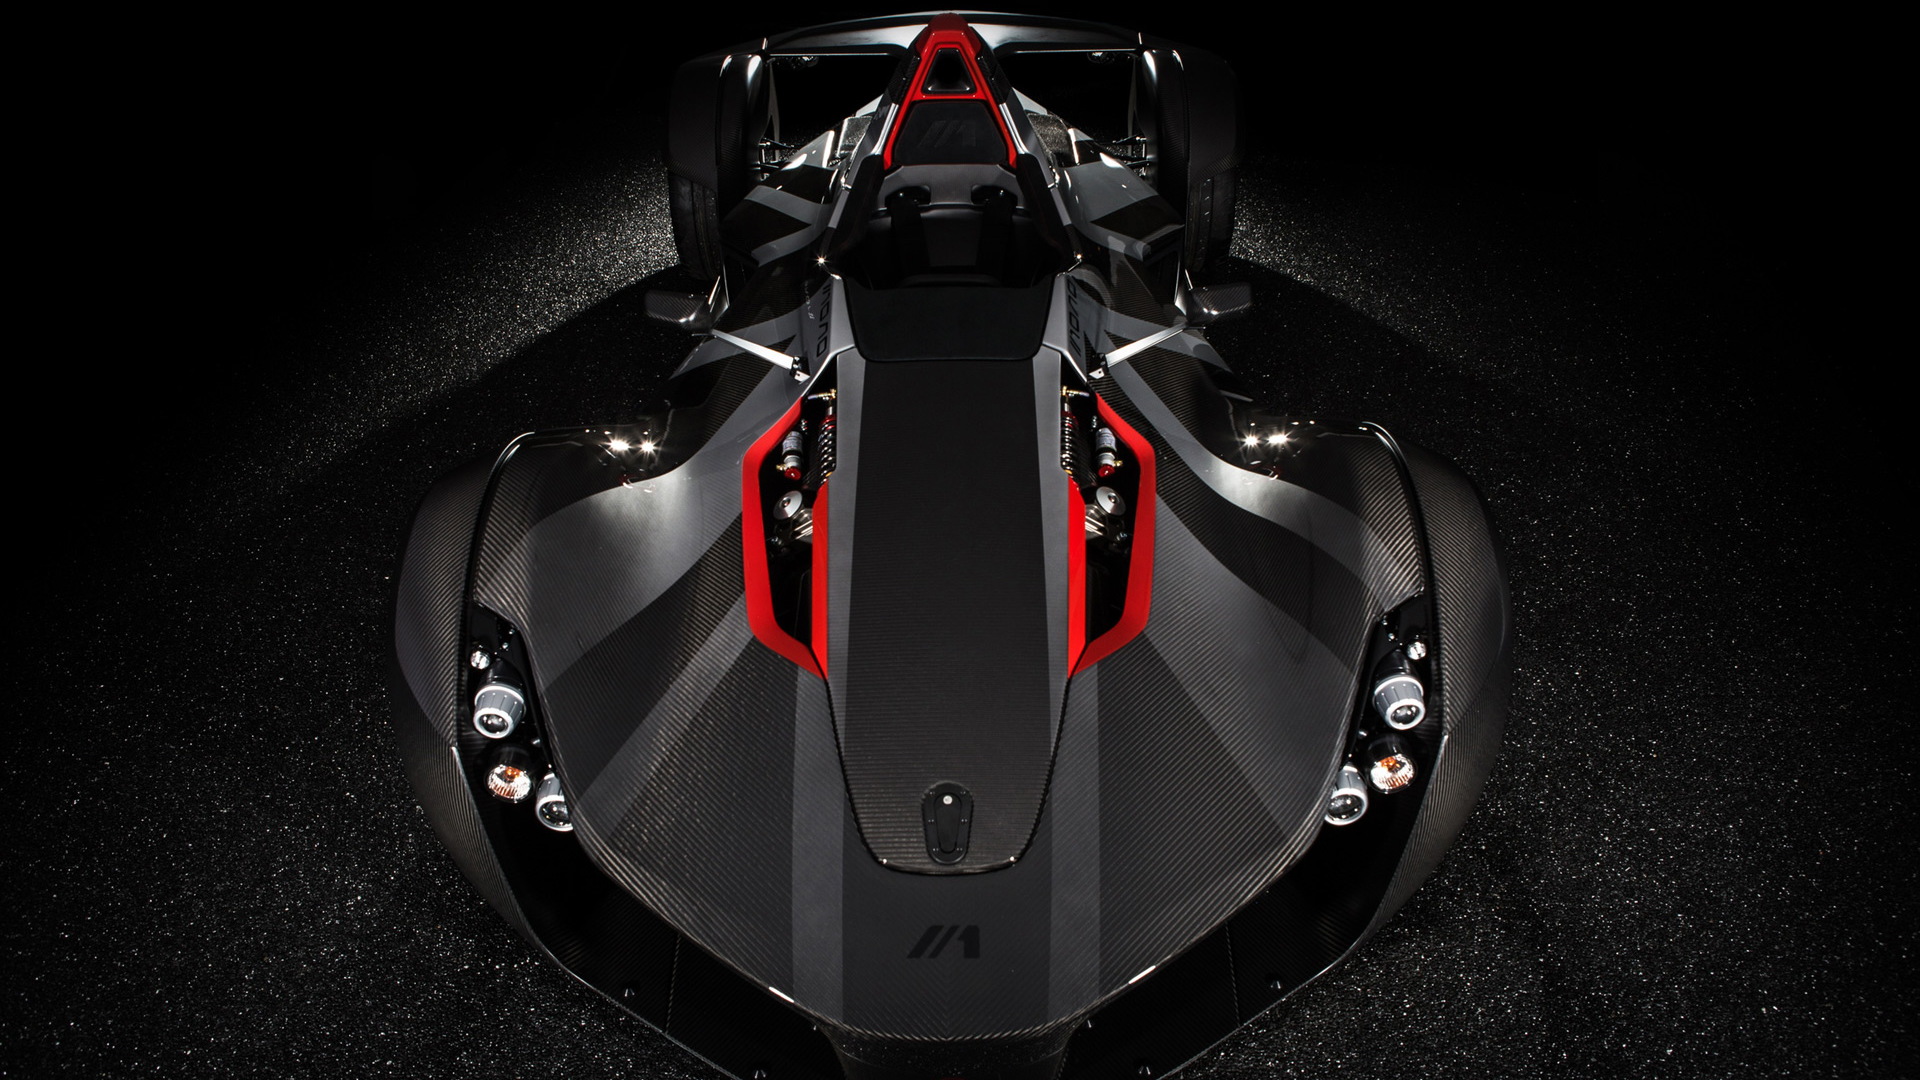 2016 BAC Mono fitted with rear wheel arches made from graphene